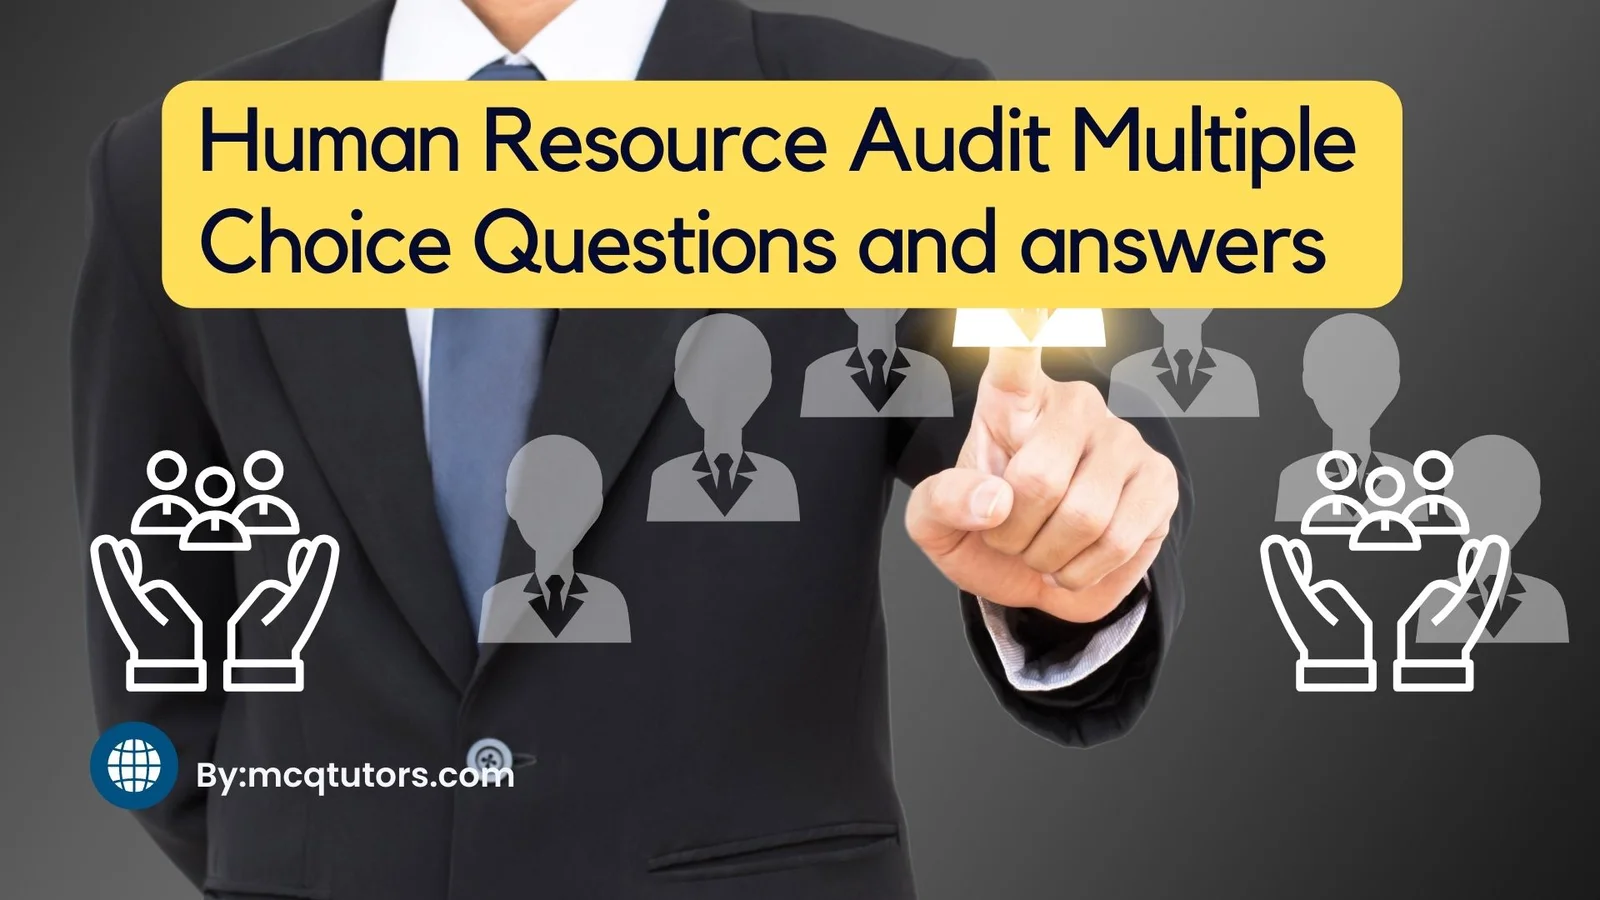 Human Resource Audit Multiple Choice Questions